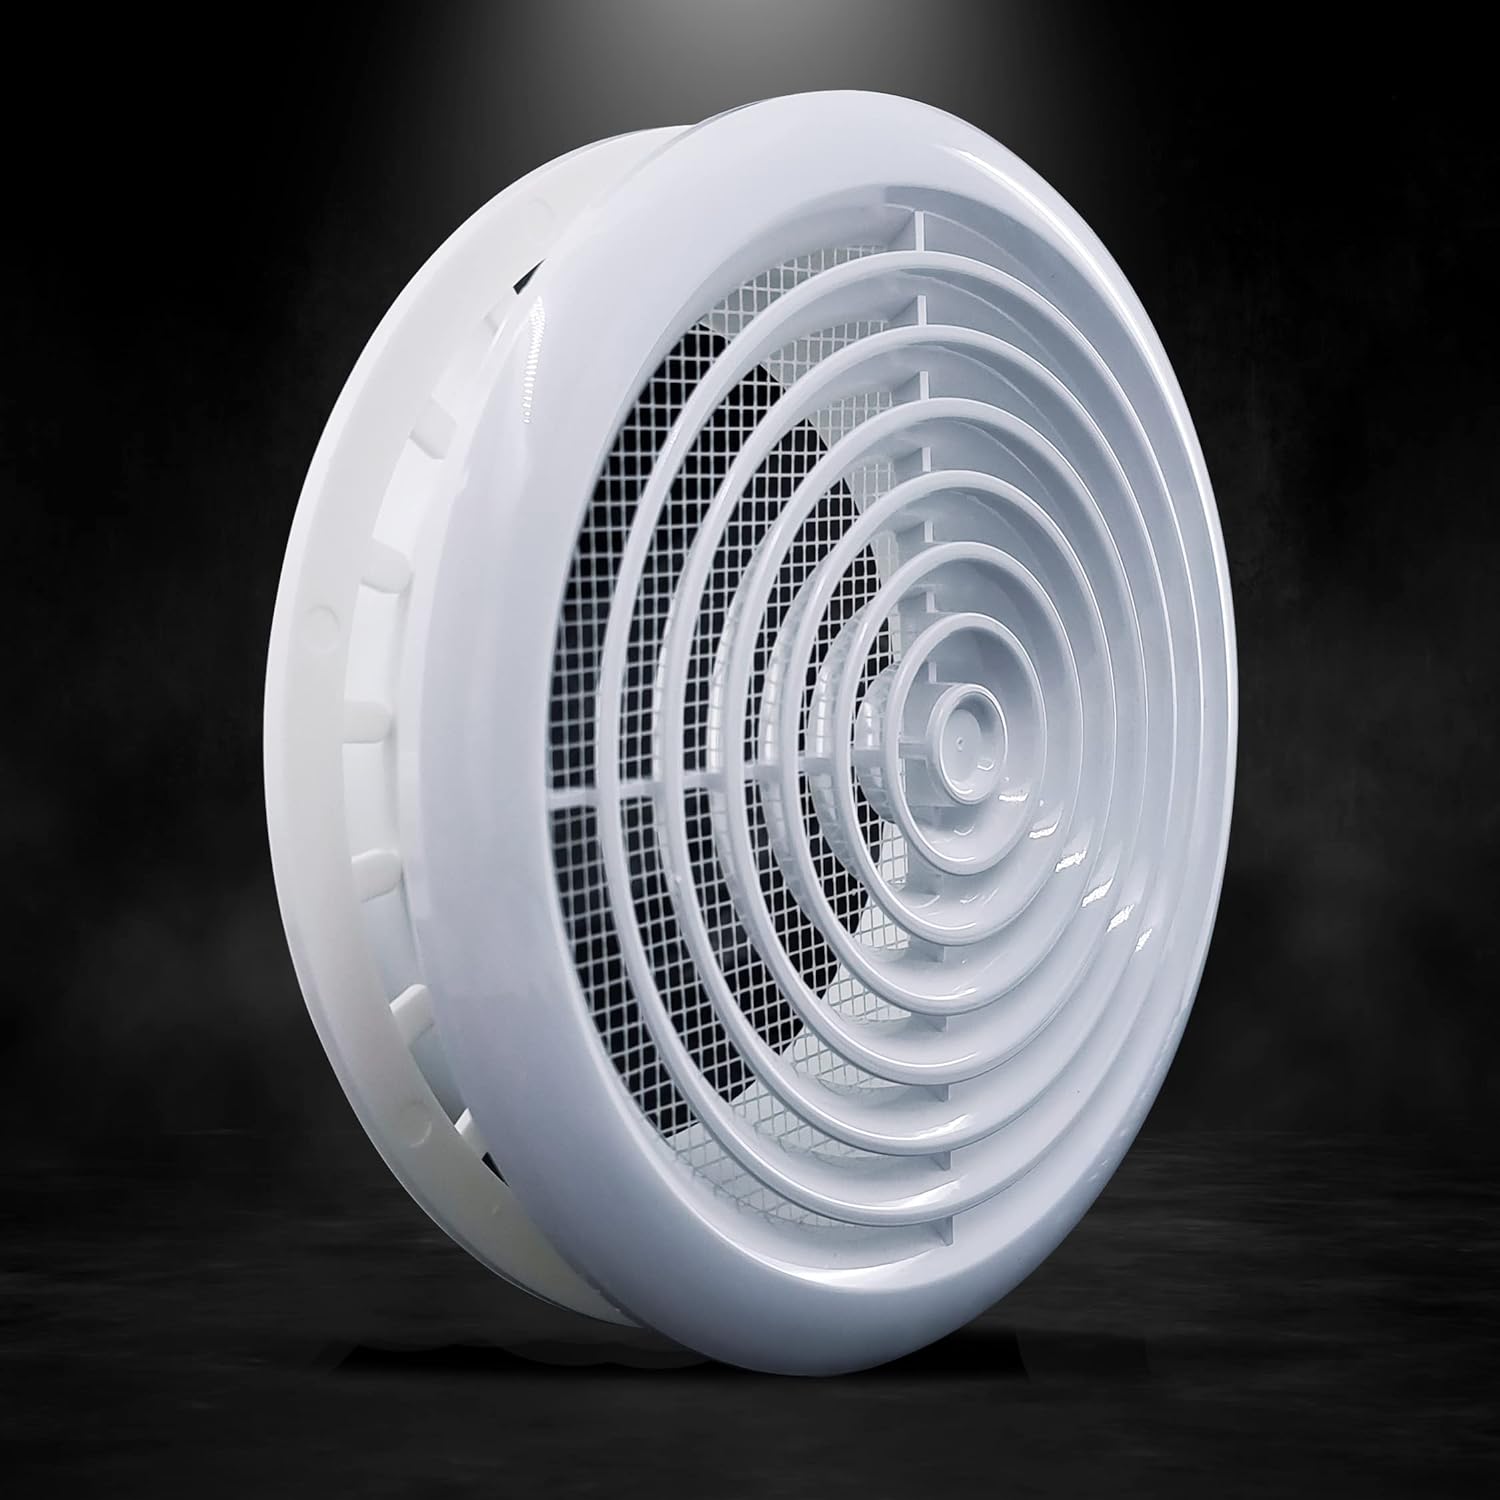 Blauberg UK 4 inch 100mm White Circular Ceiling Vent Diffuser Duct Extractor Ventilation Fan Grille